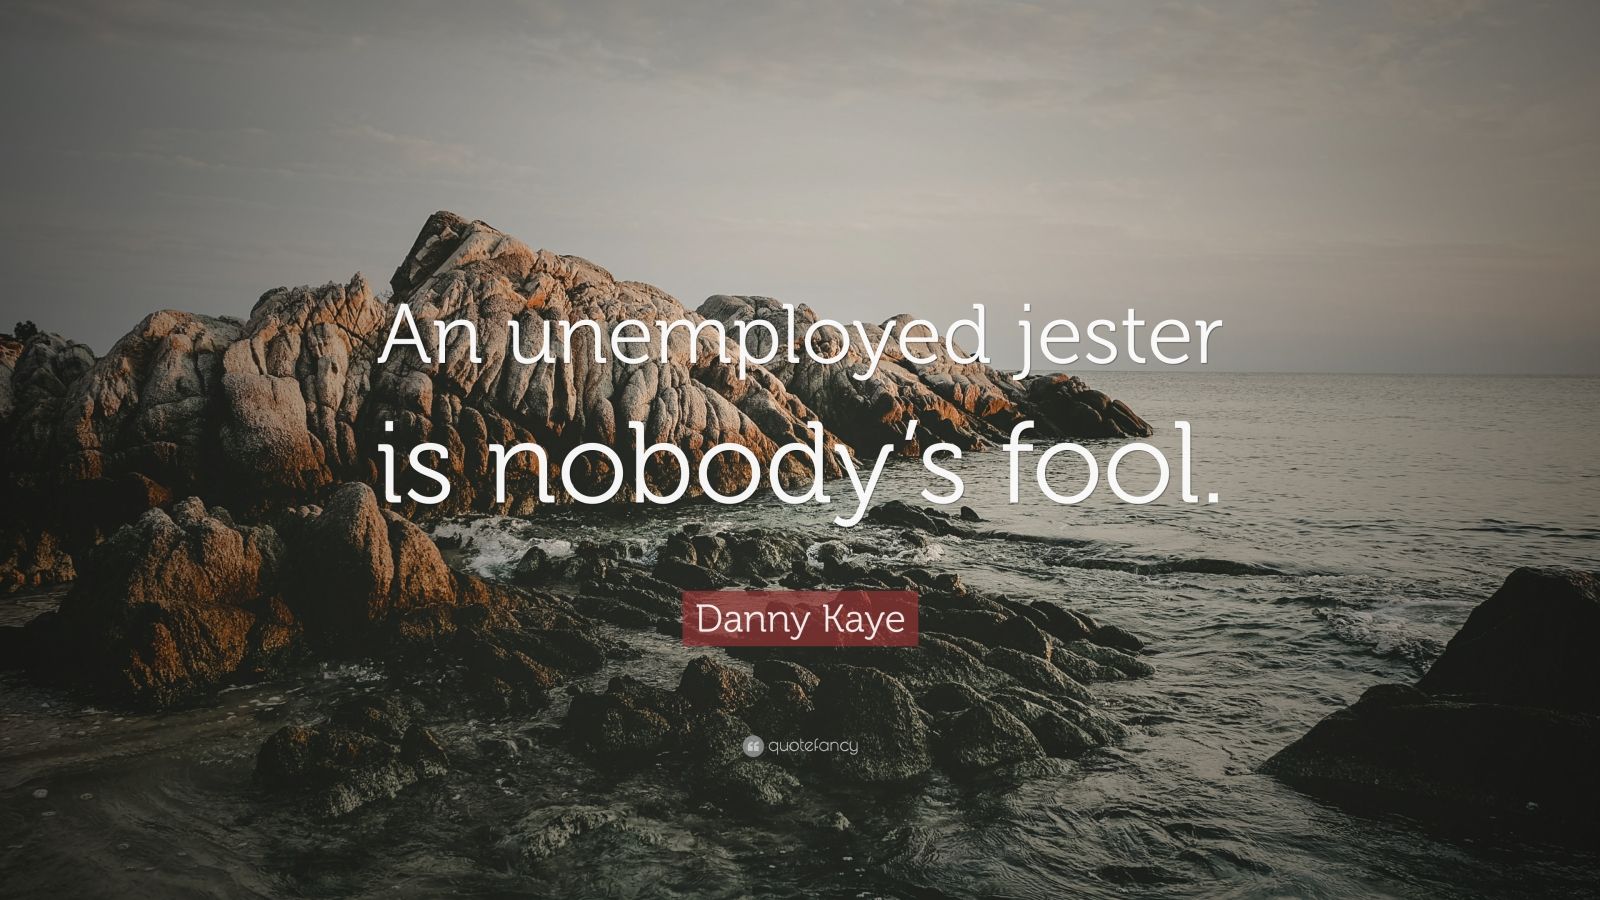 Danny kaye quote âan unemployed jester is nobodys foolâ